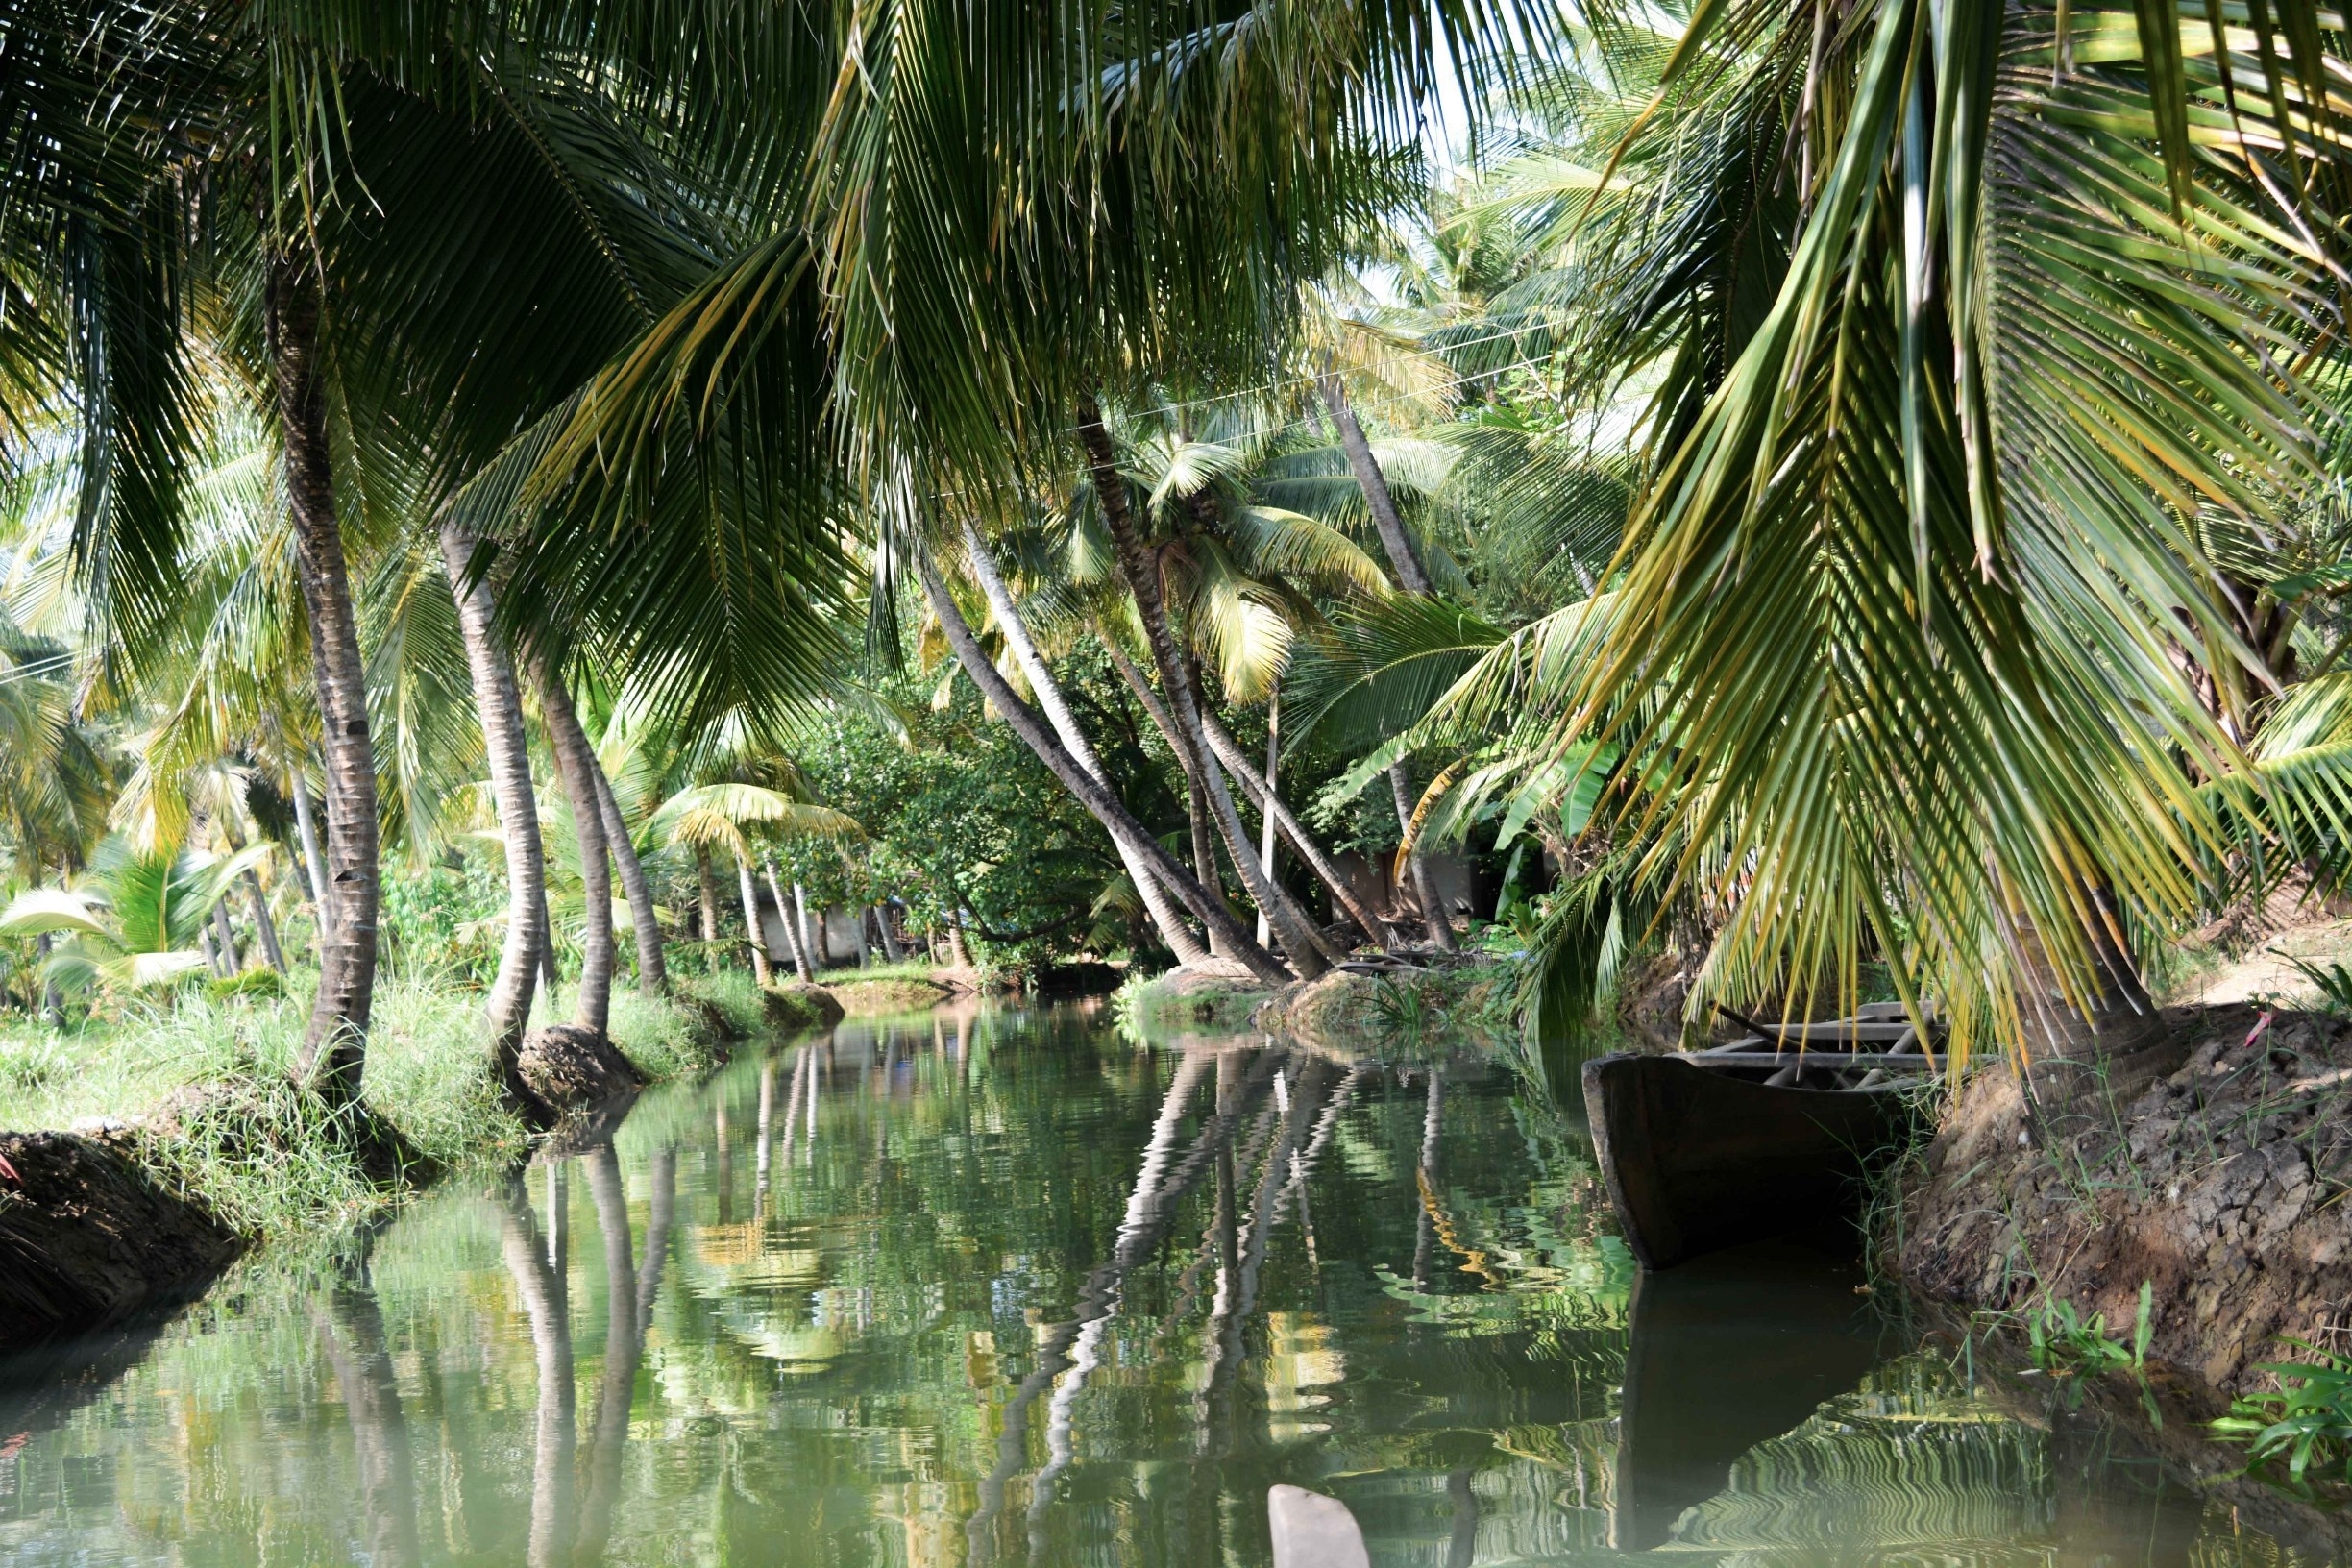 An unforgettable day cruising through the Kollam backwaters on a canoe

#Green